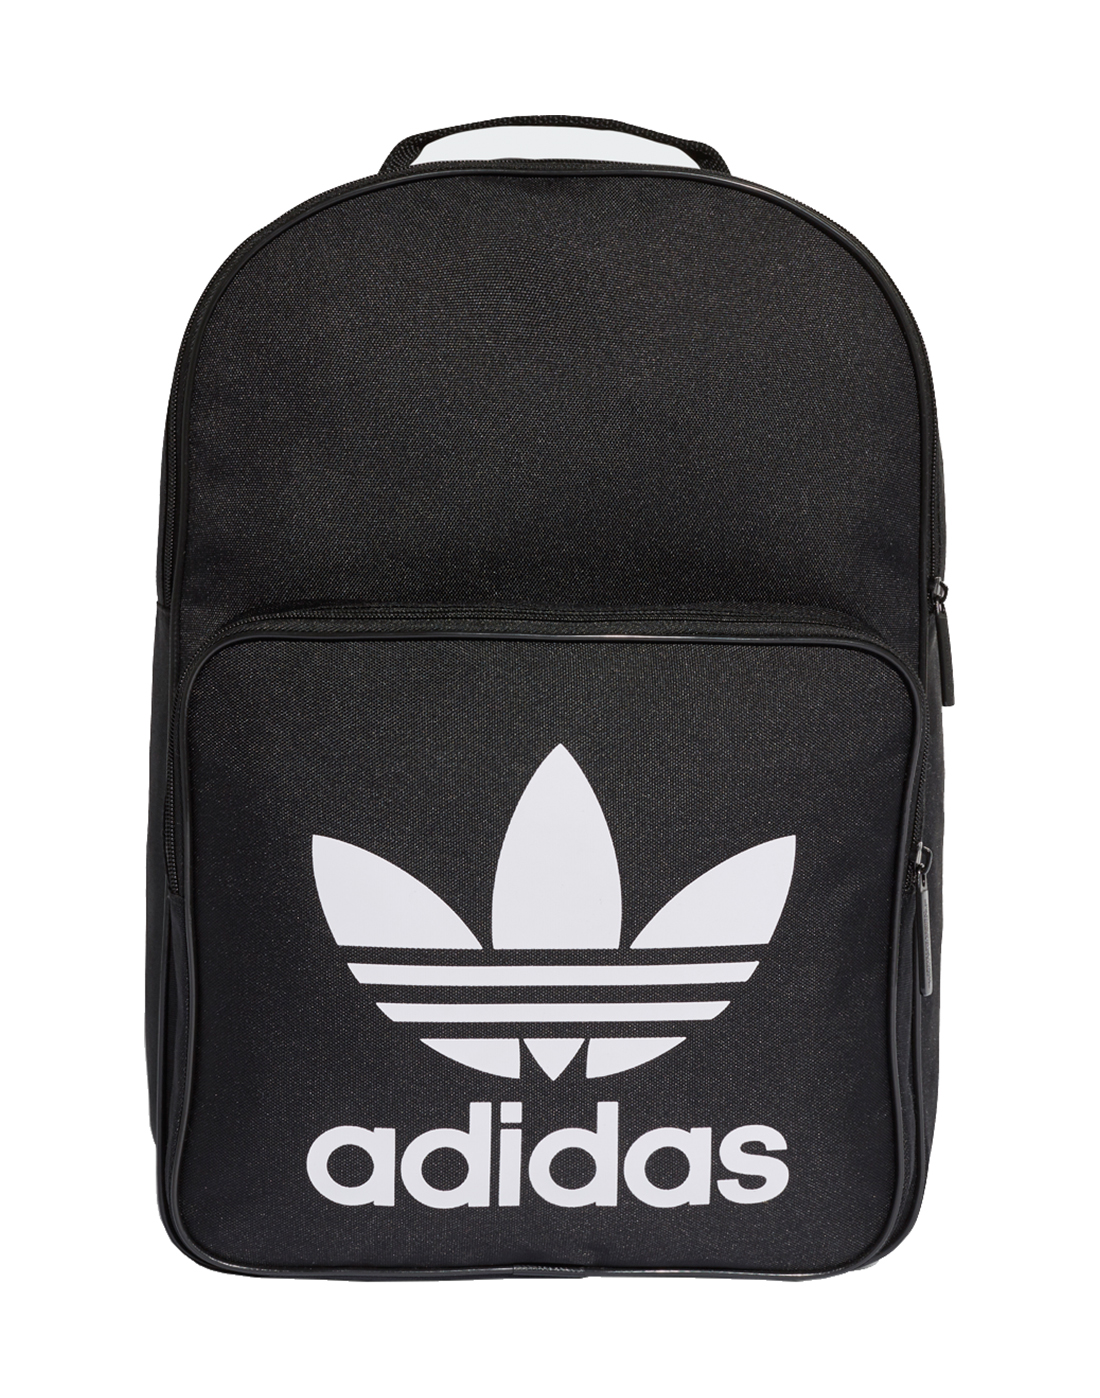 adidas originals backpack with small logo in black